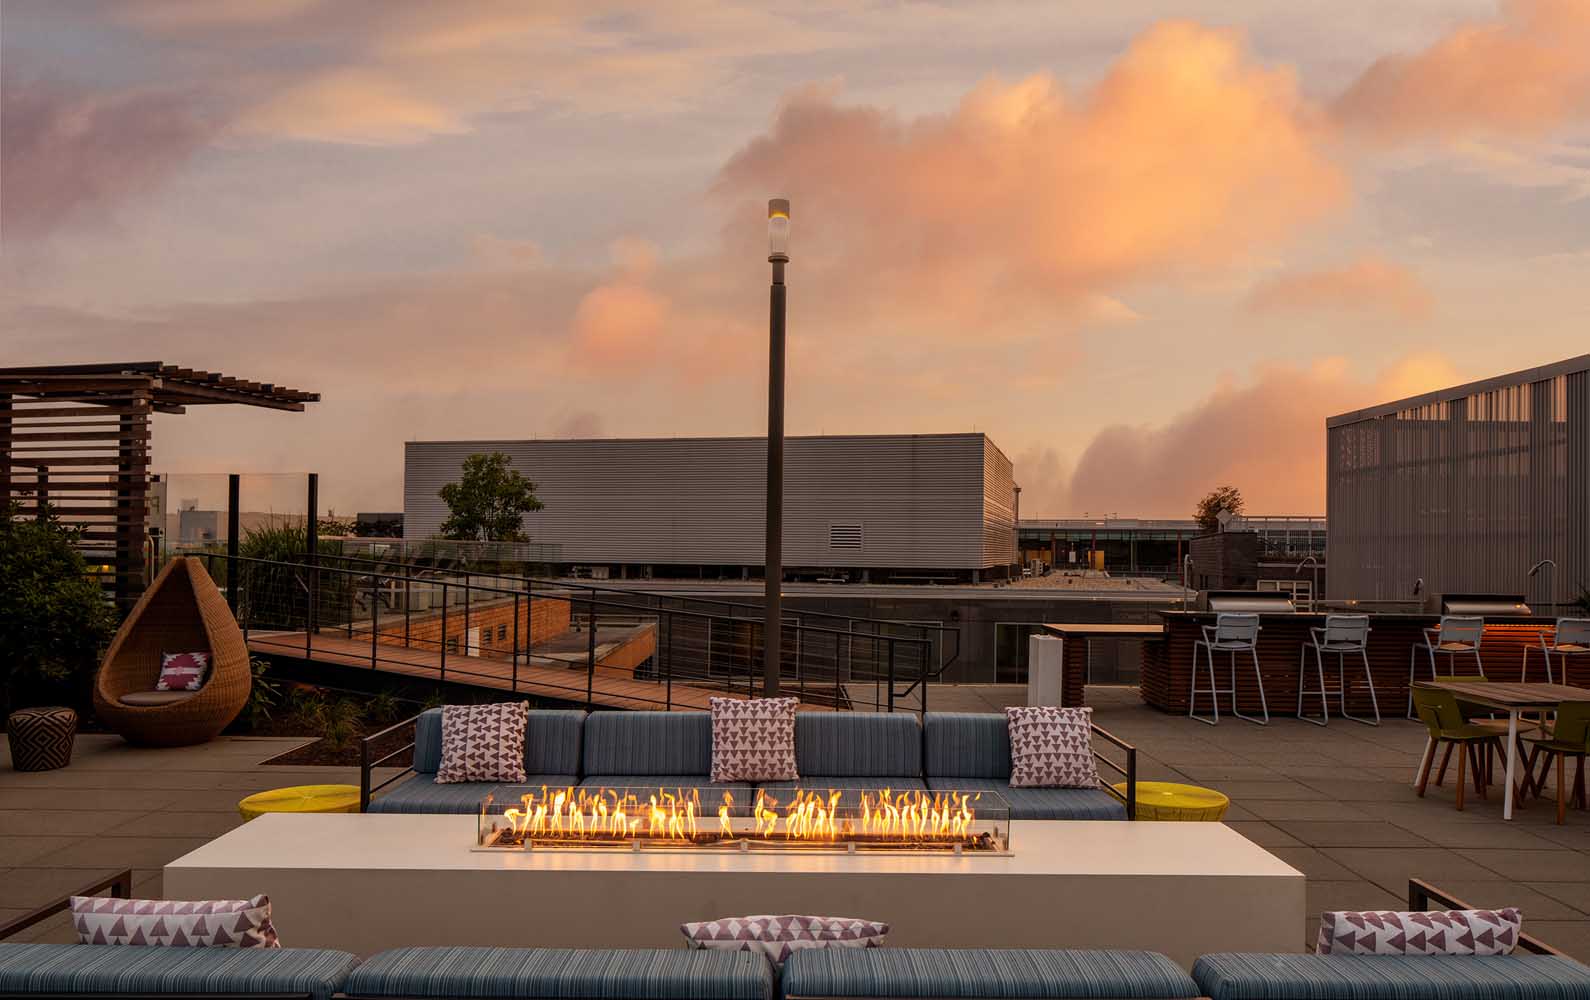 Gather and mingle around the rooftop fireplace